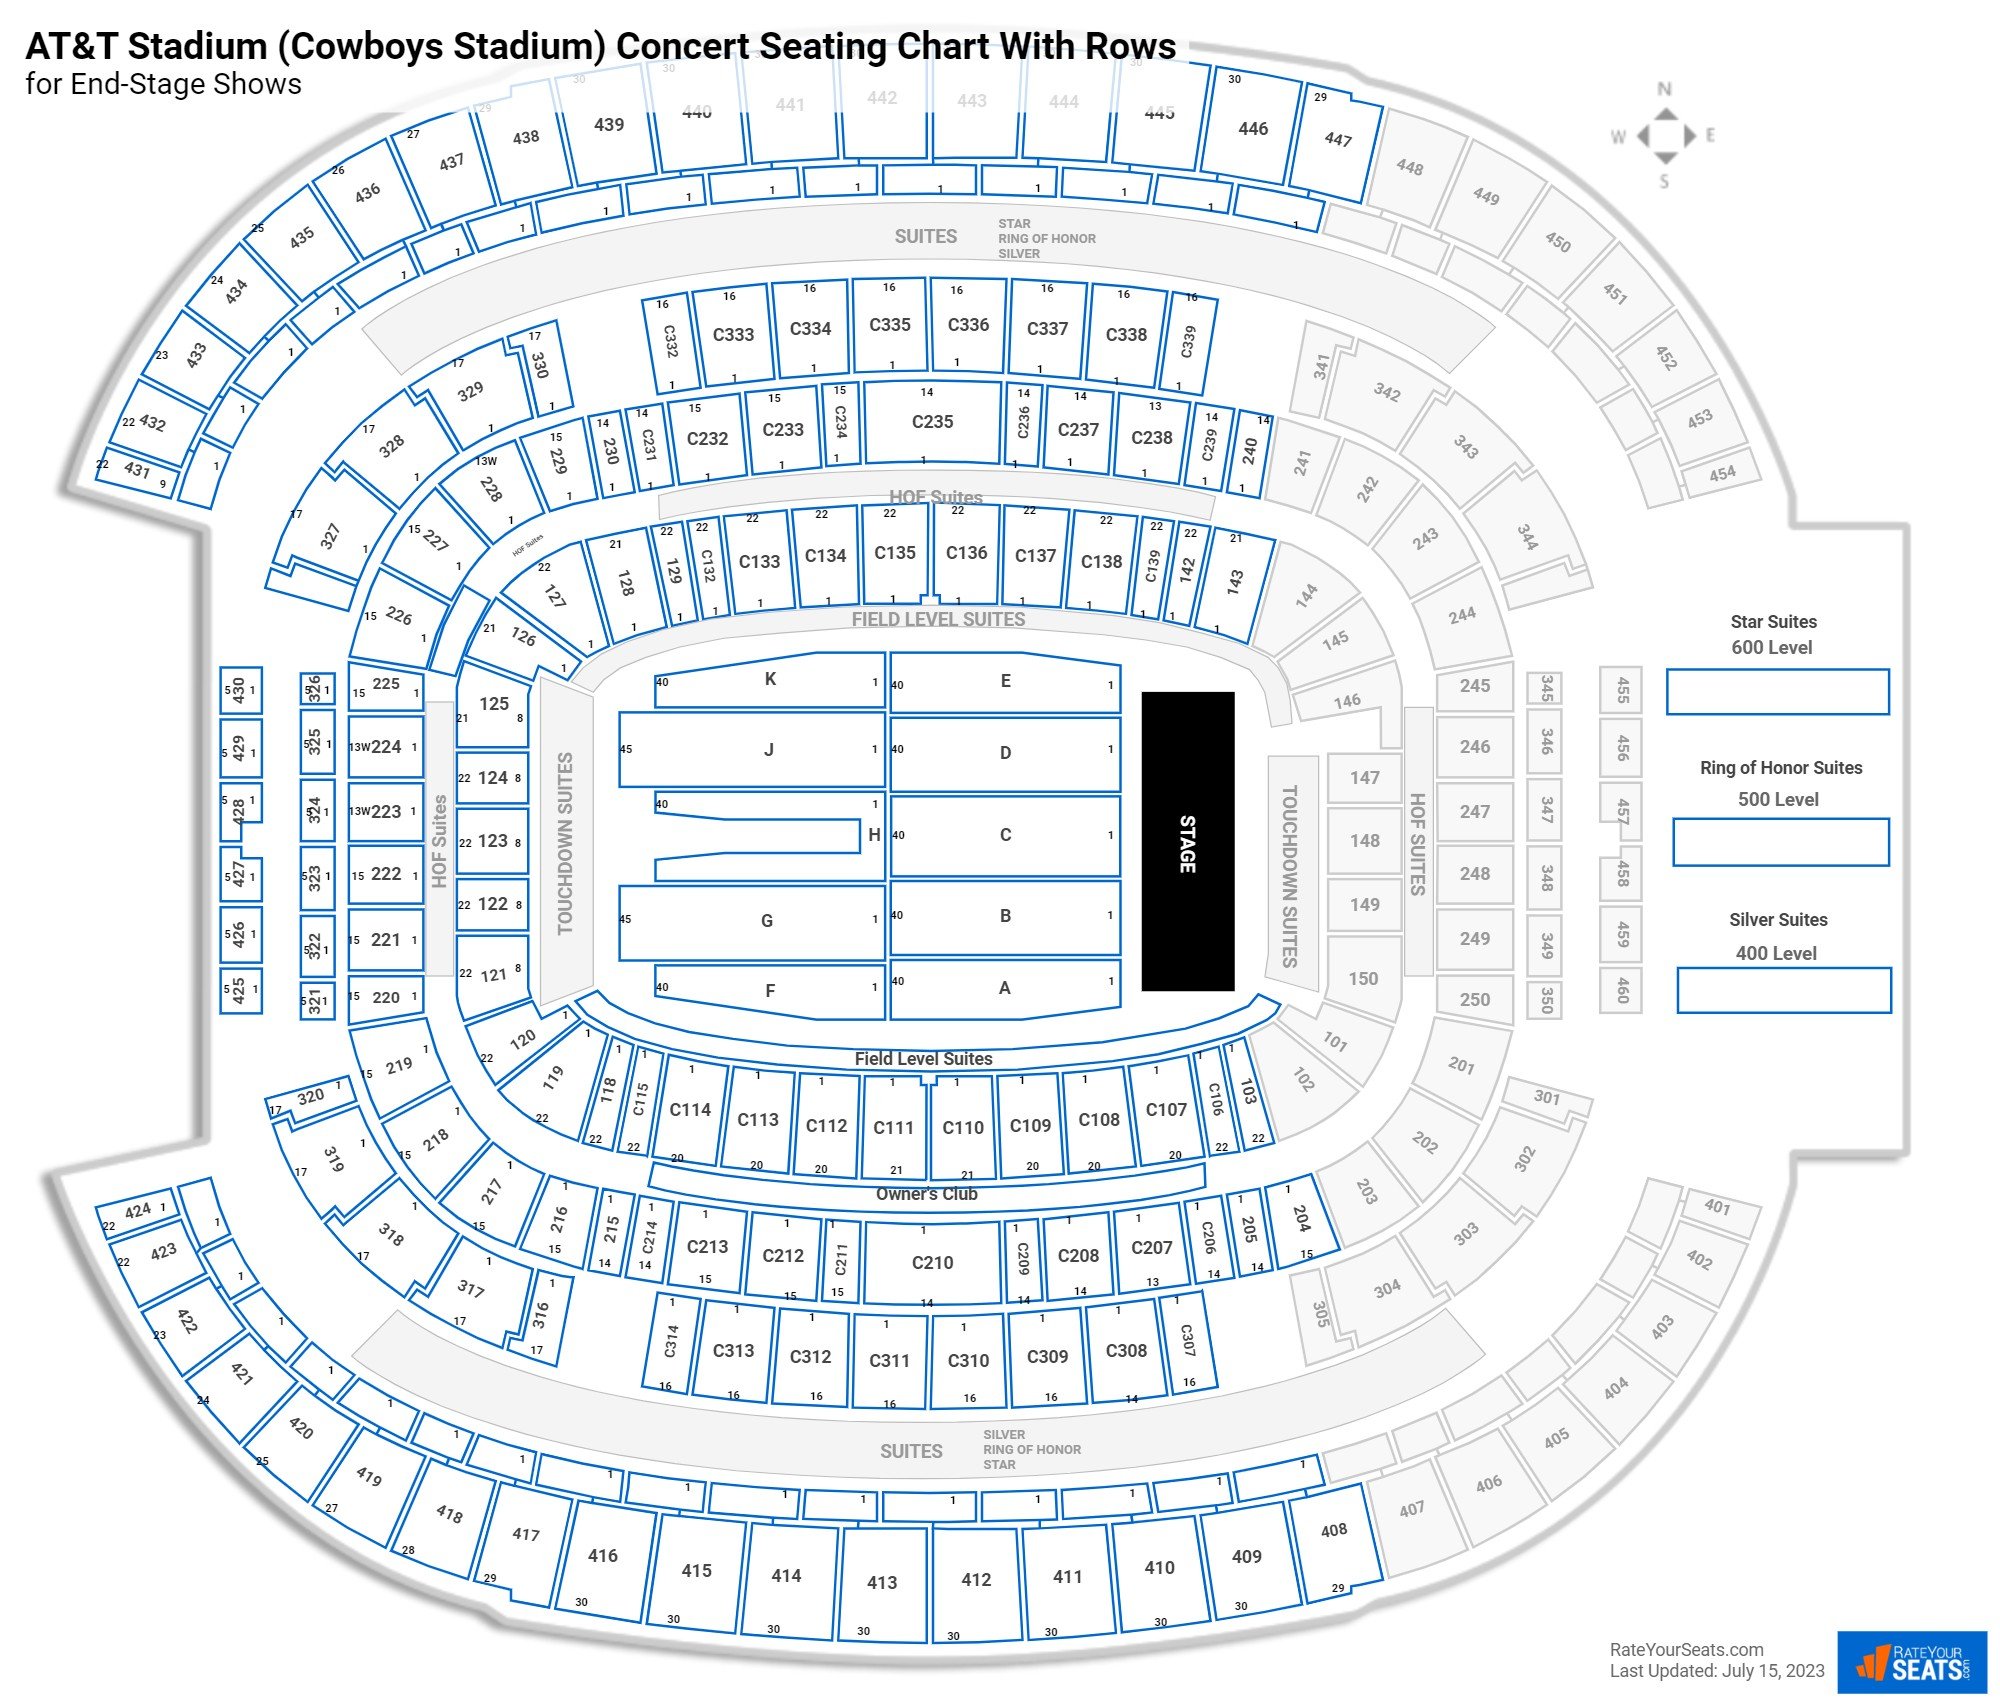 AT&T Stadium Seating Charts for Concerts - RateYourSeats.com